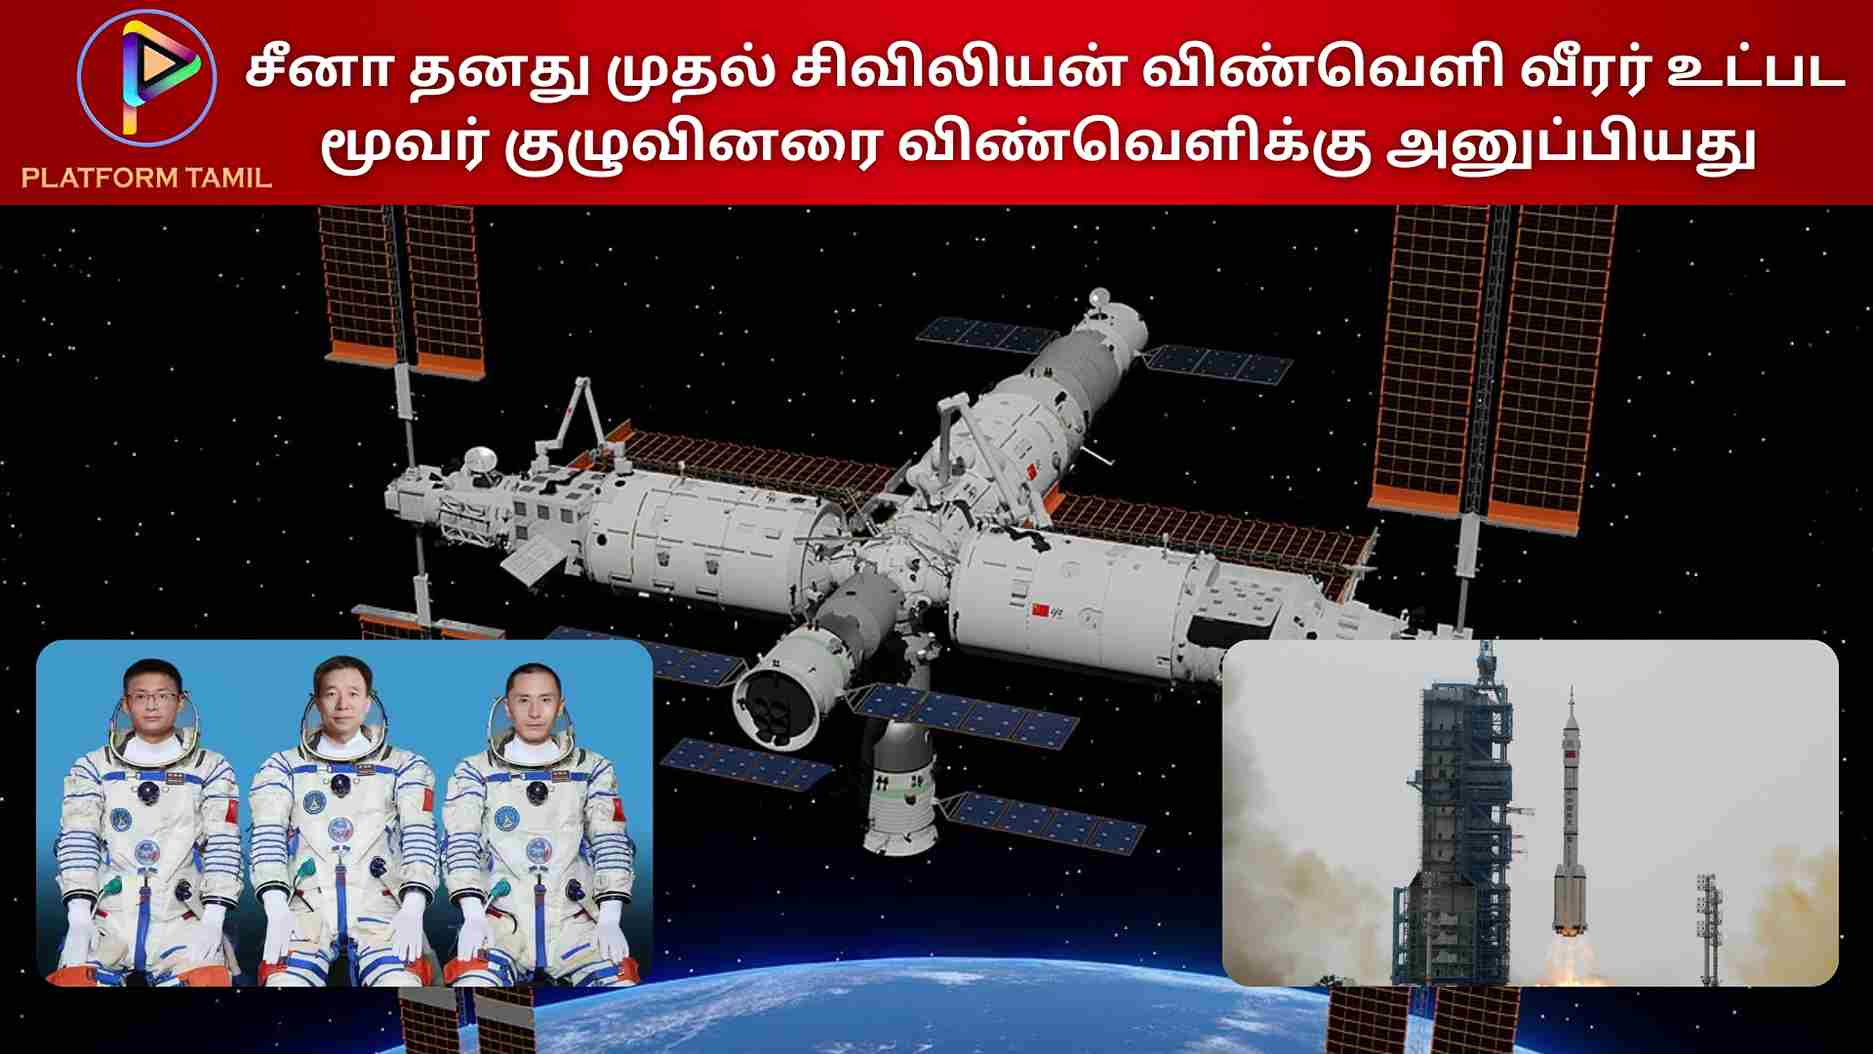 China Launches Manned Spaceship - Platform Tamil